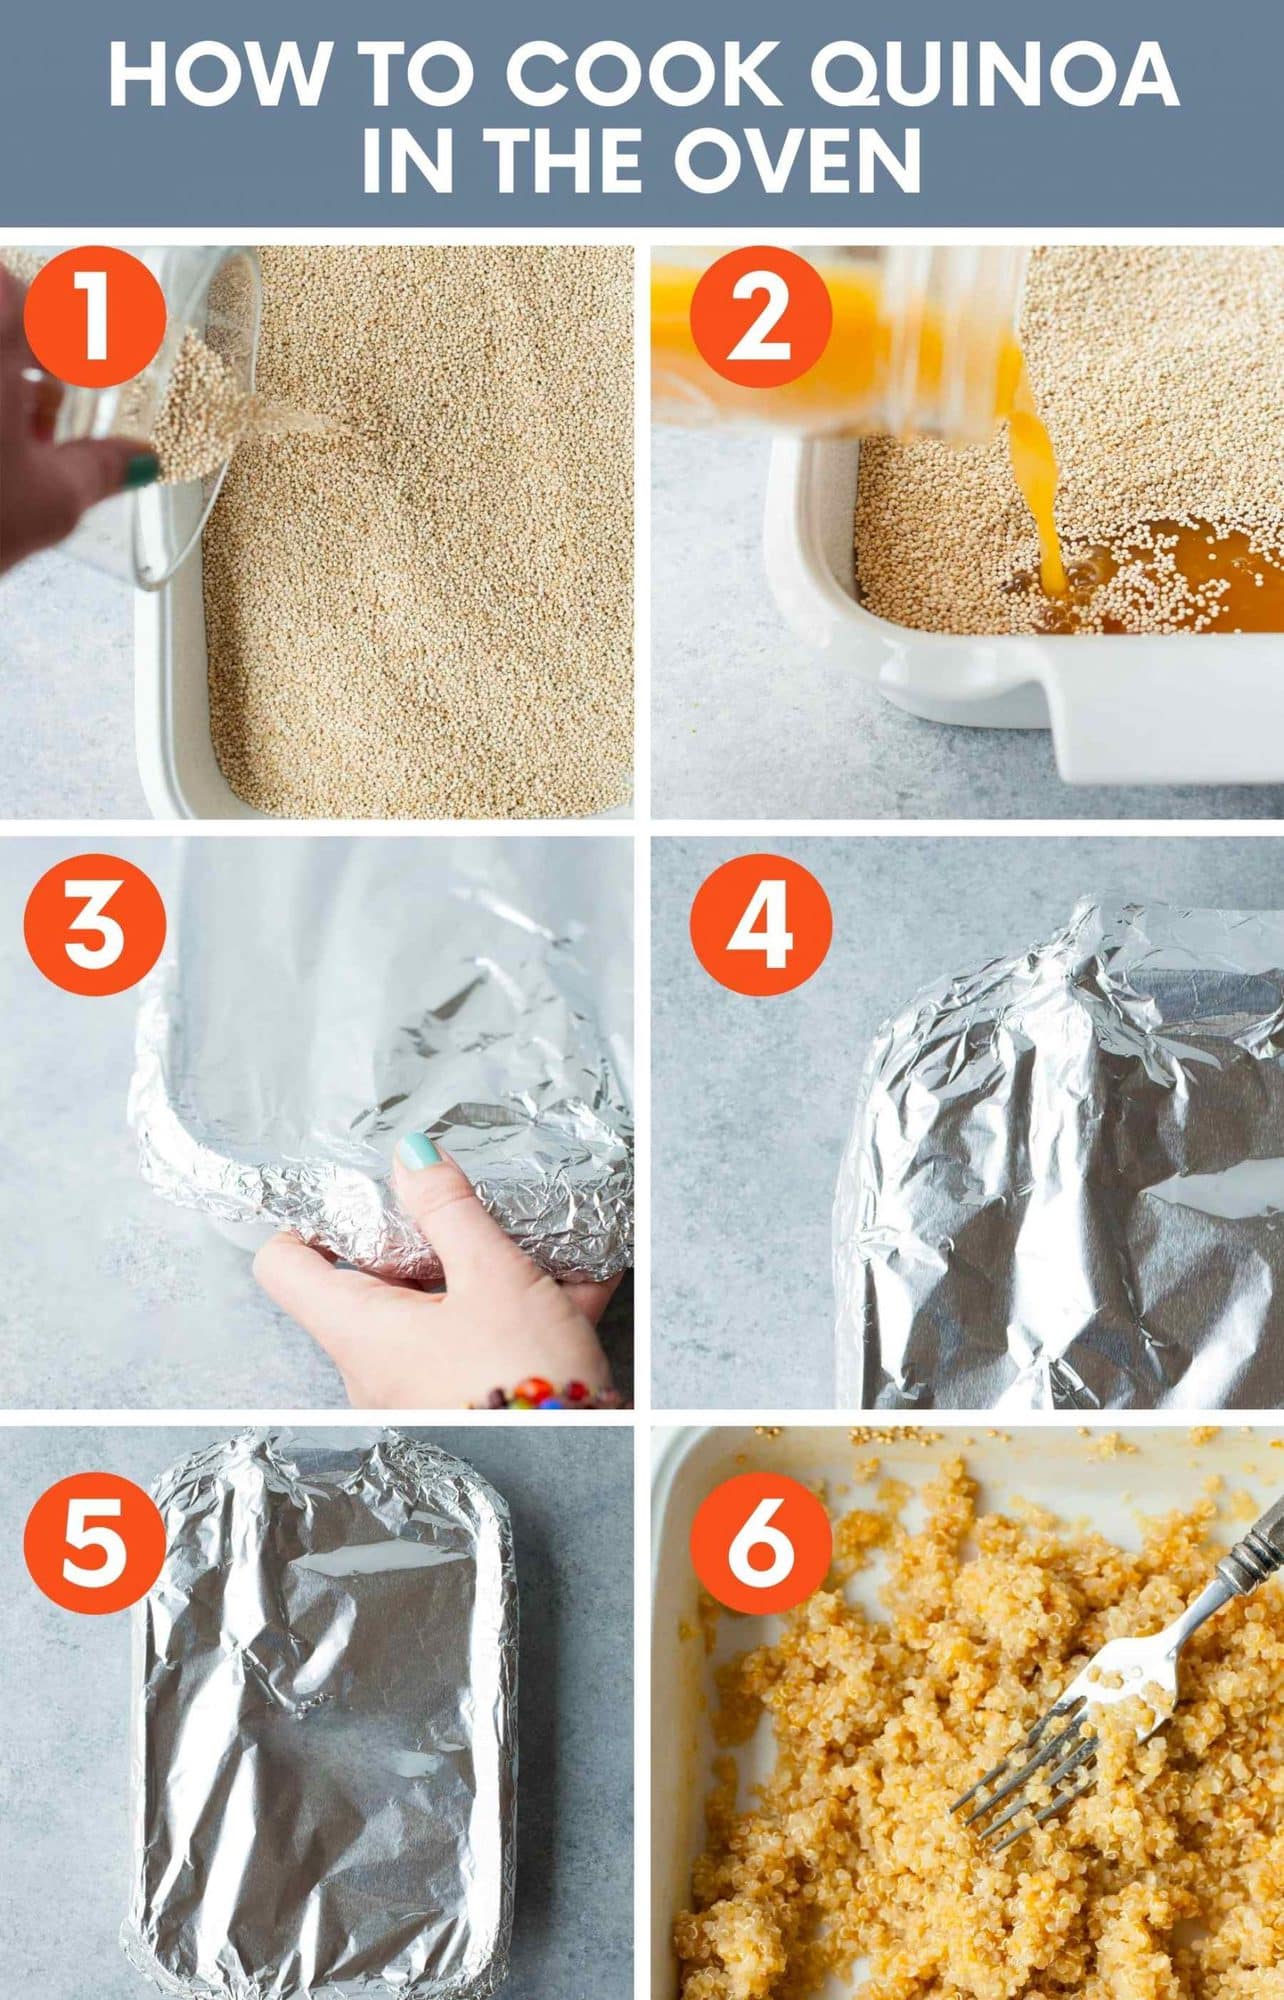 Collage showing how to cook quinoa in the oven in six steps.